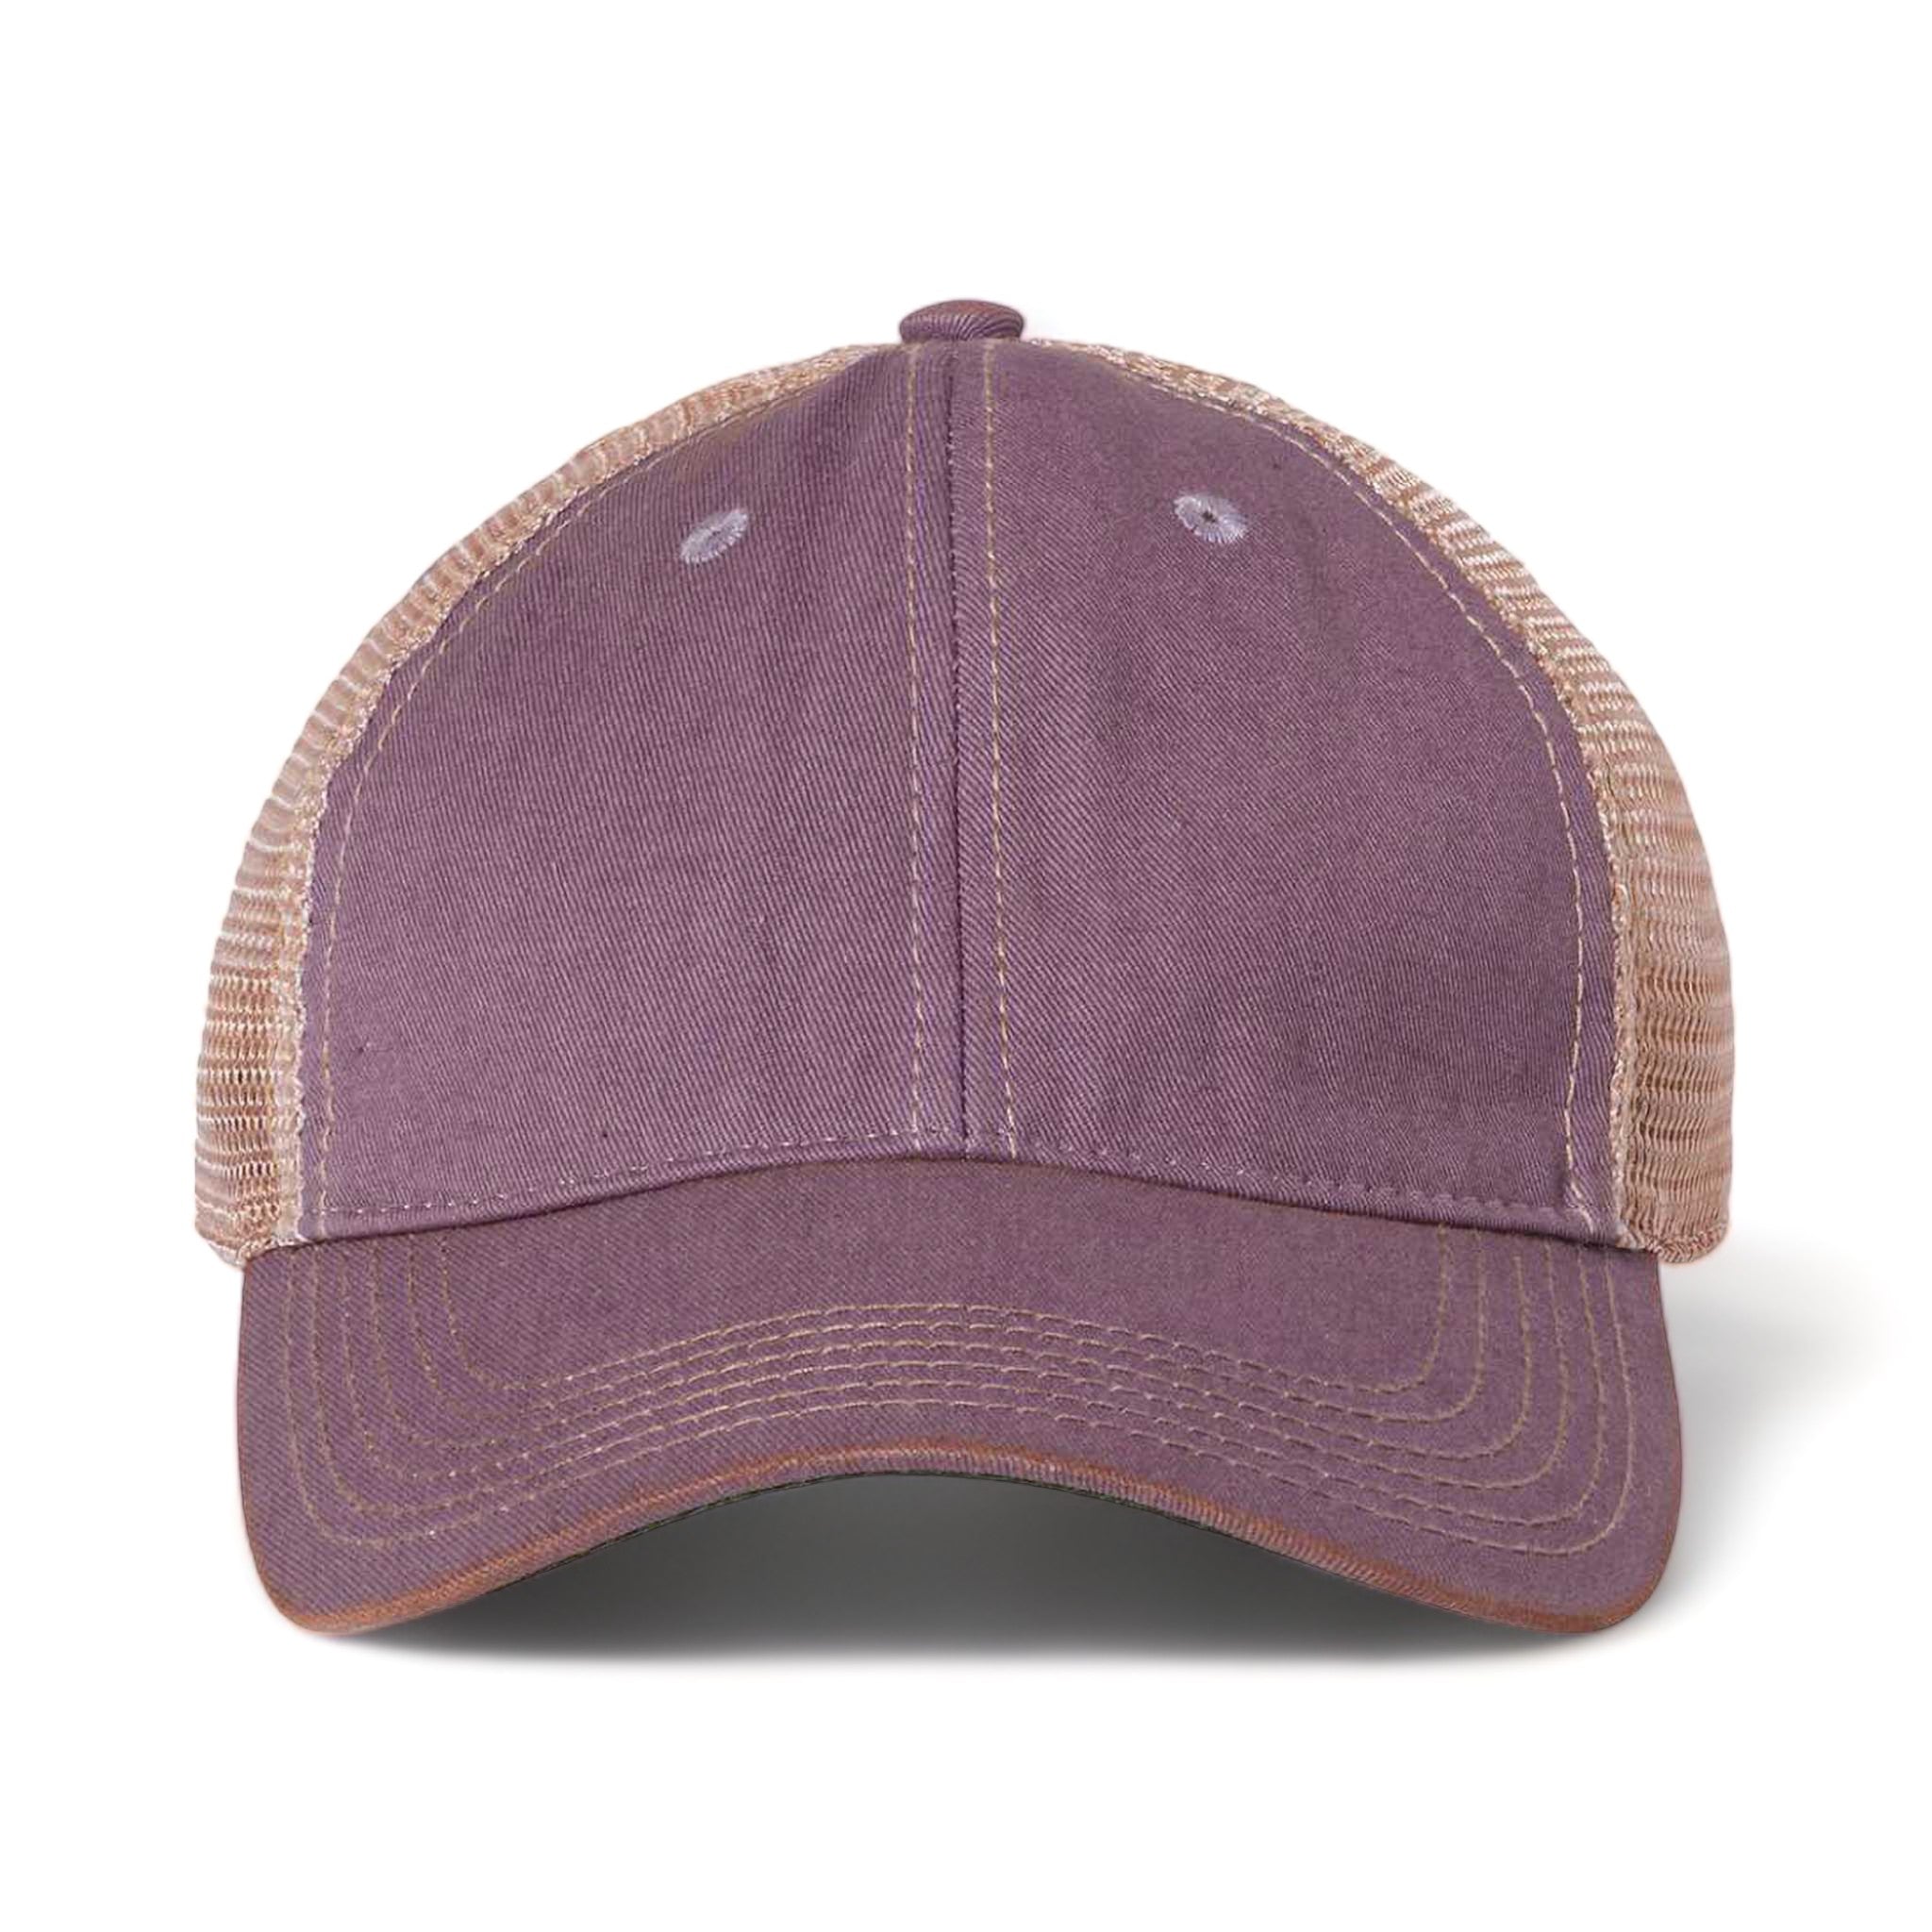 Front view of LEGACY OFA custom hat in lavender and khaki